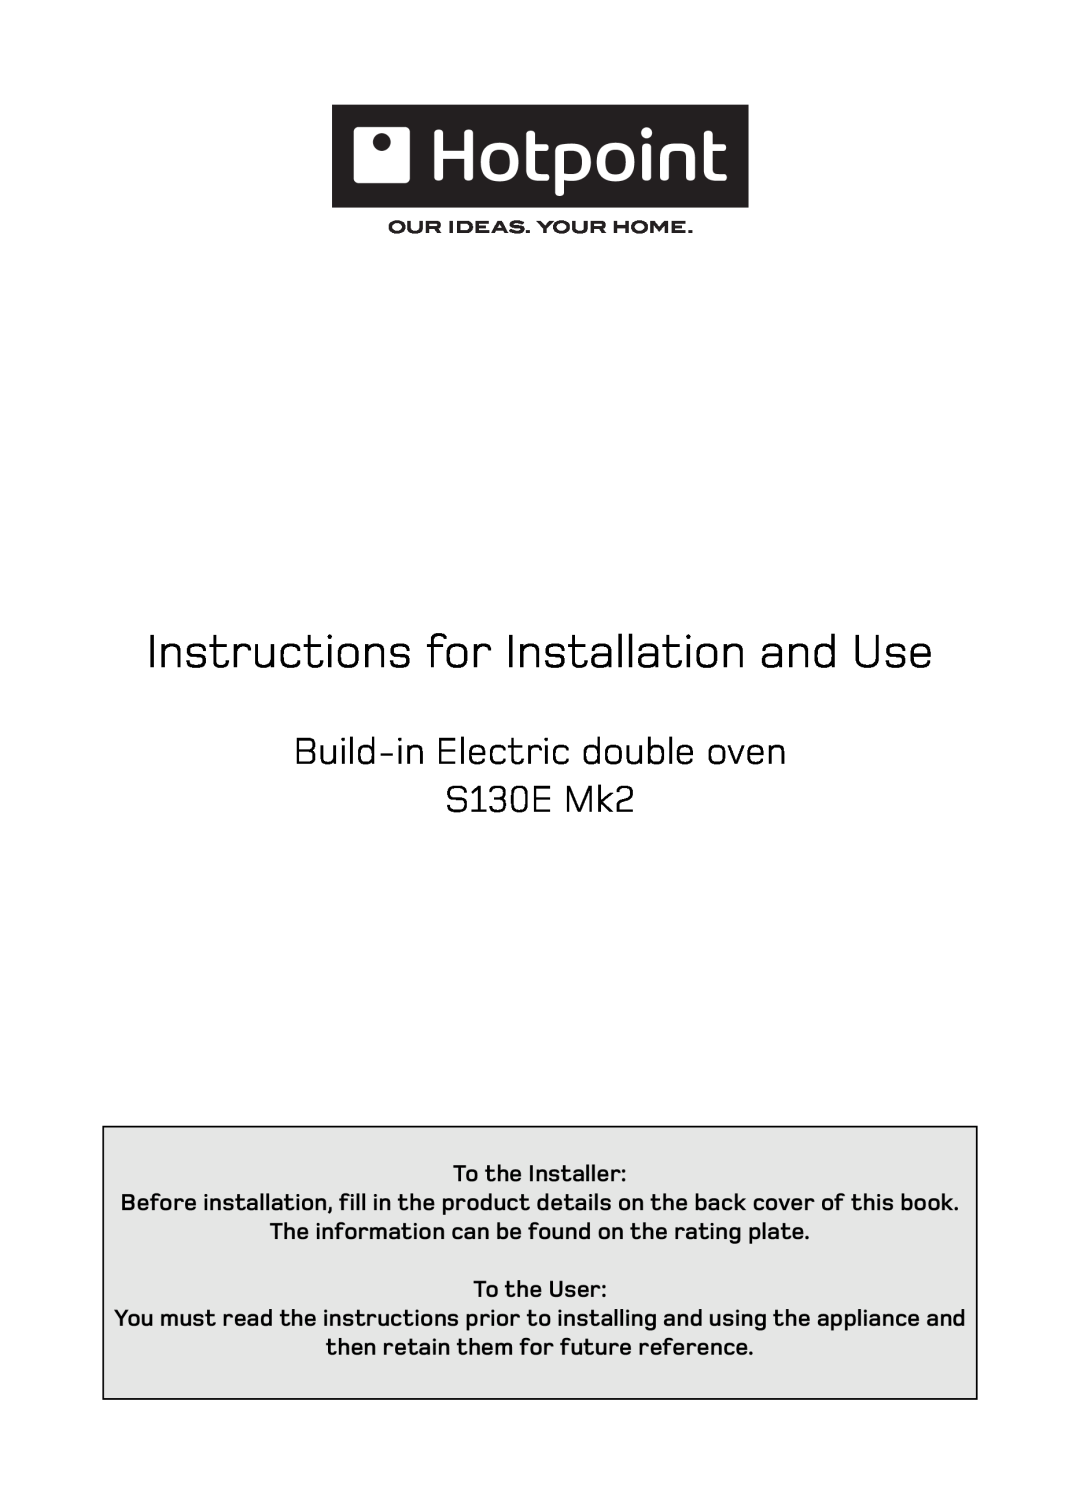 Hotpoint manual Instructions for Installation and Use, Build-in Electric double oven S130E Mk2, To the Installer 